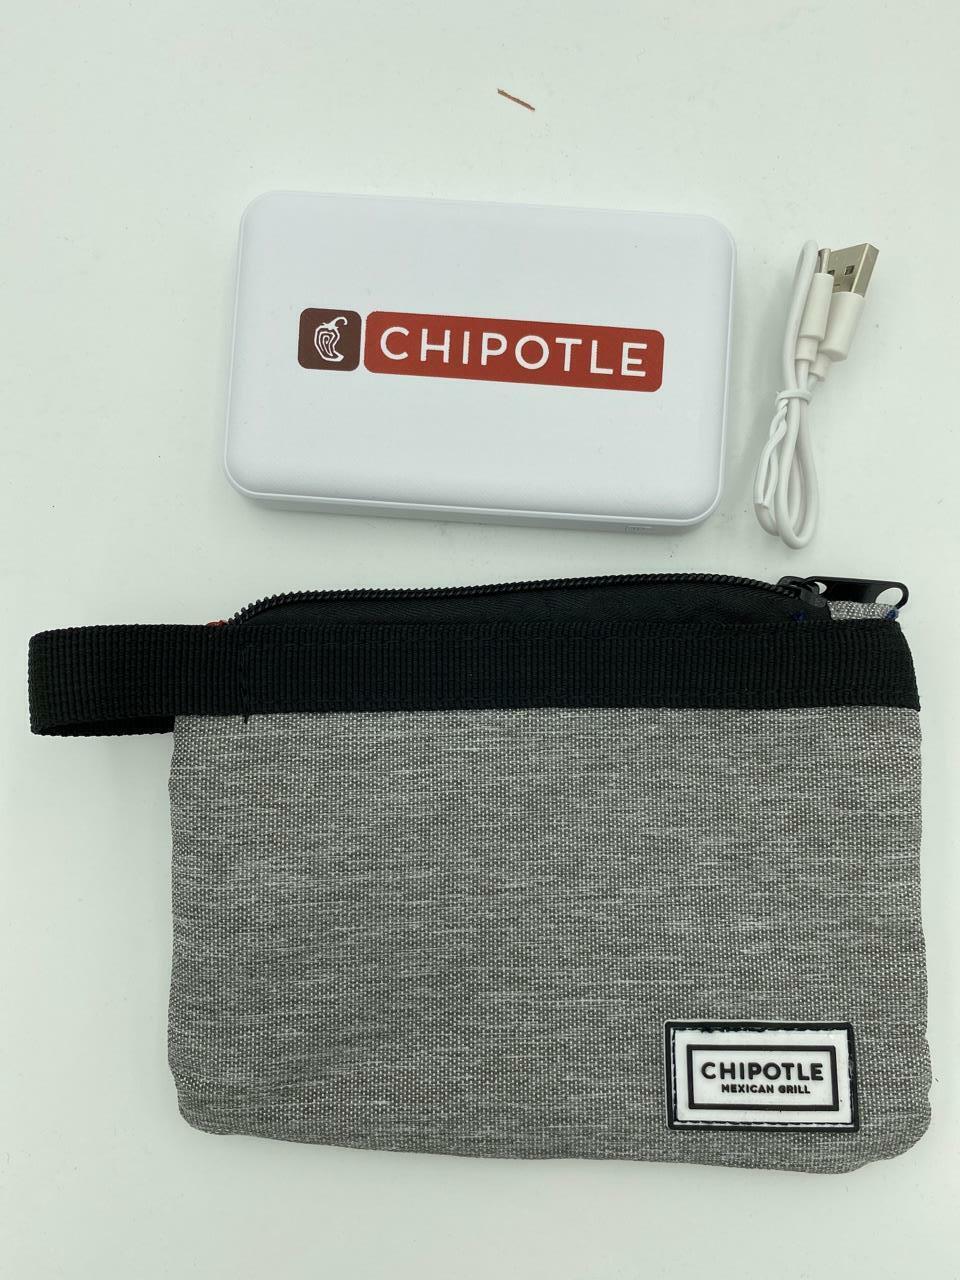 NEW Chipotle Mexican Grill Battery Power Bank 5000mAh 3.7V 18.5Wh Samsung iPhone